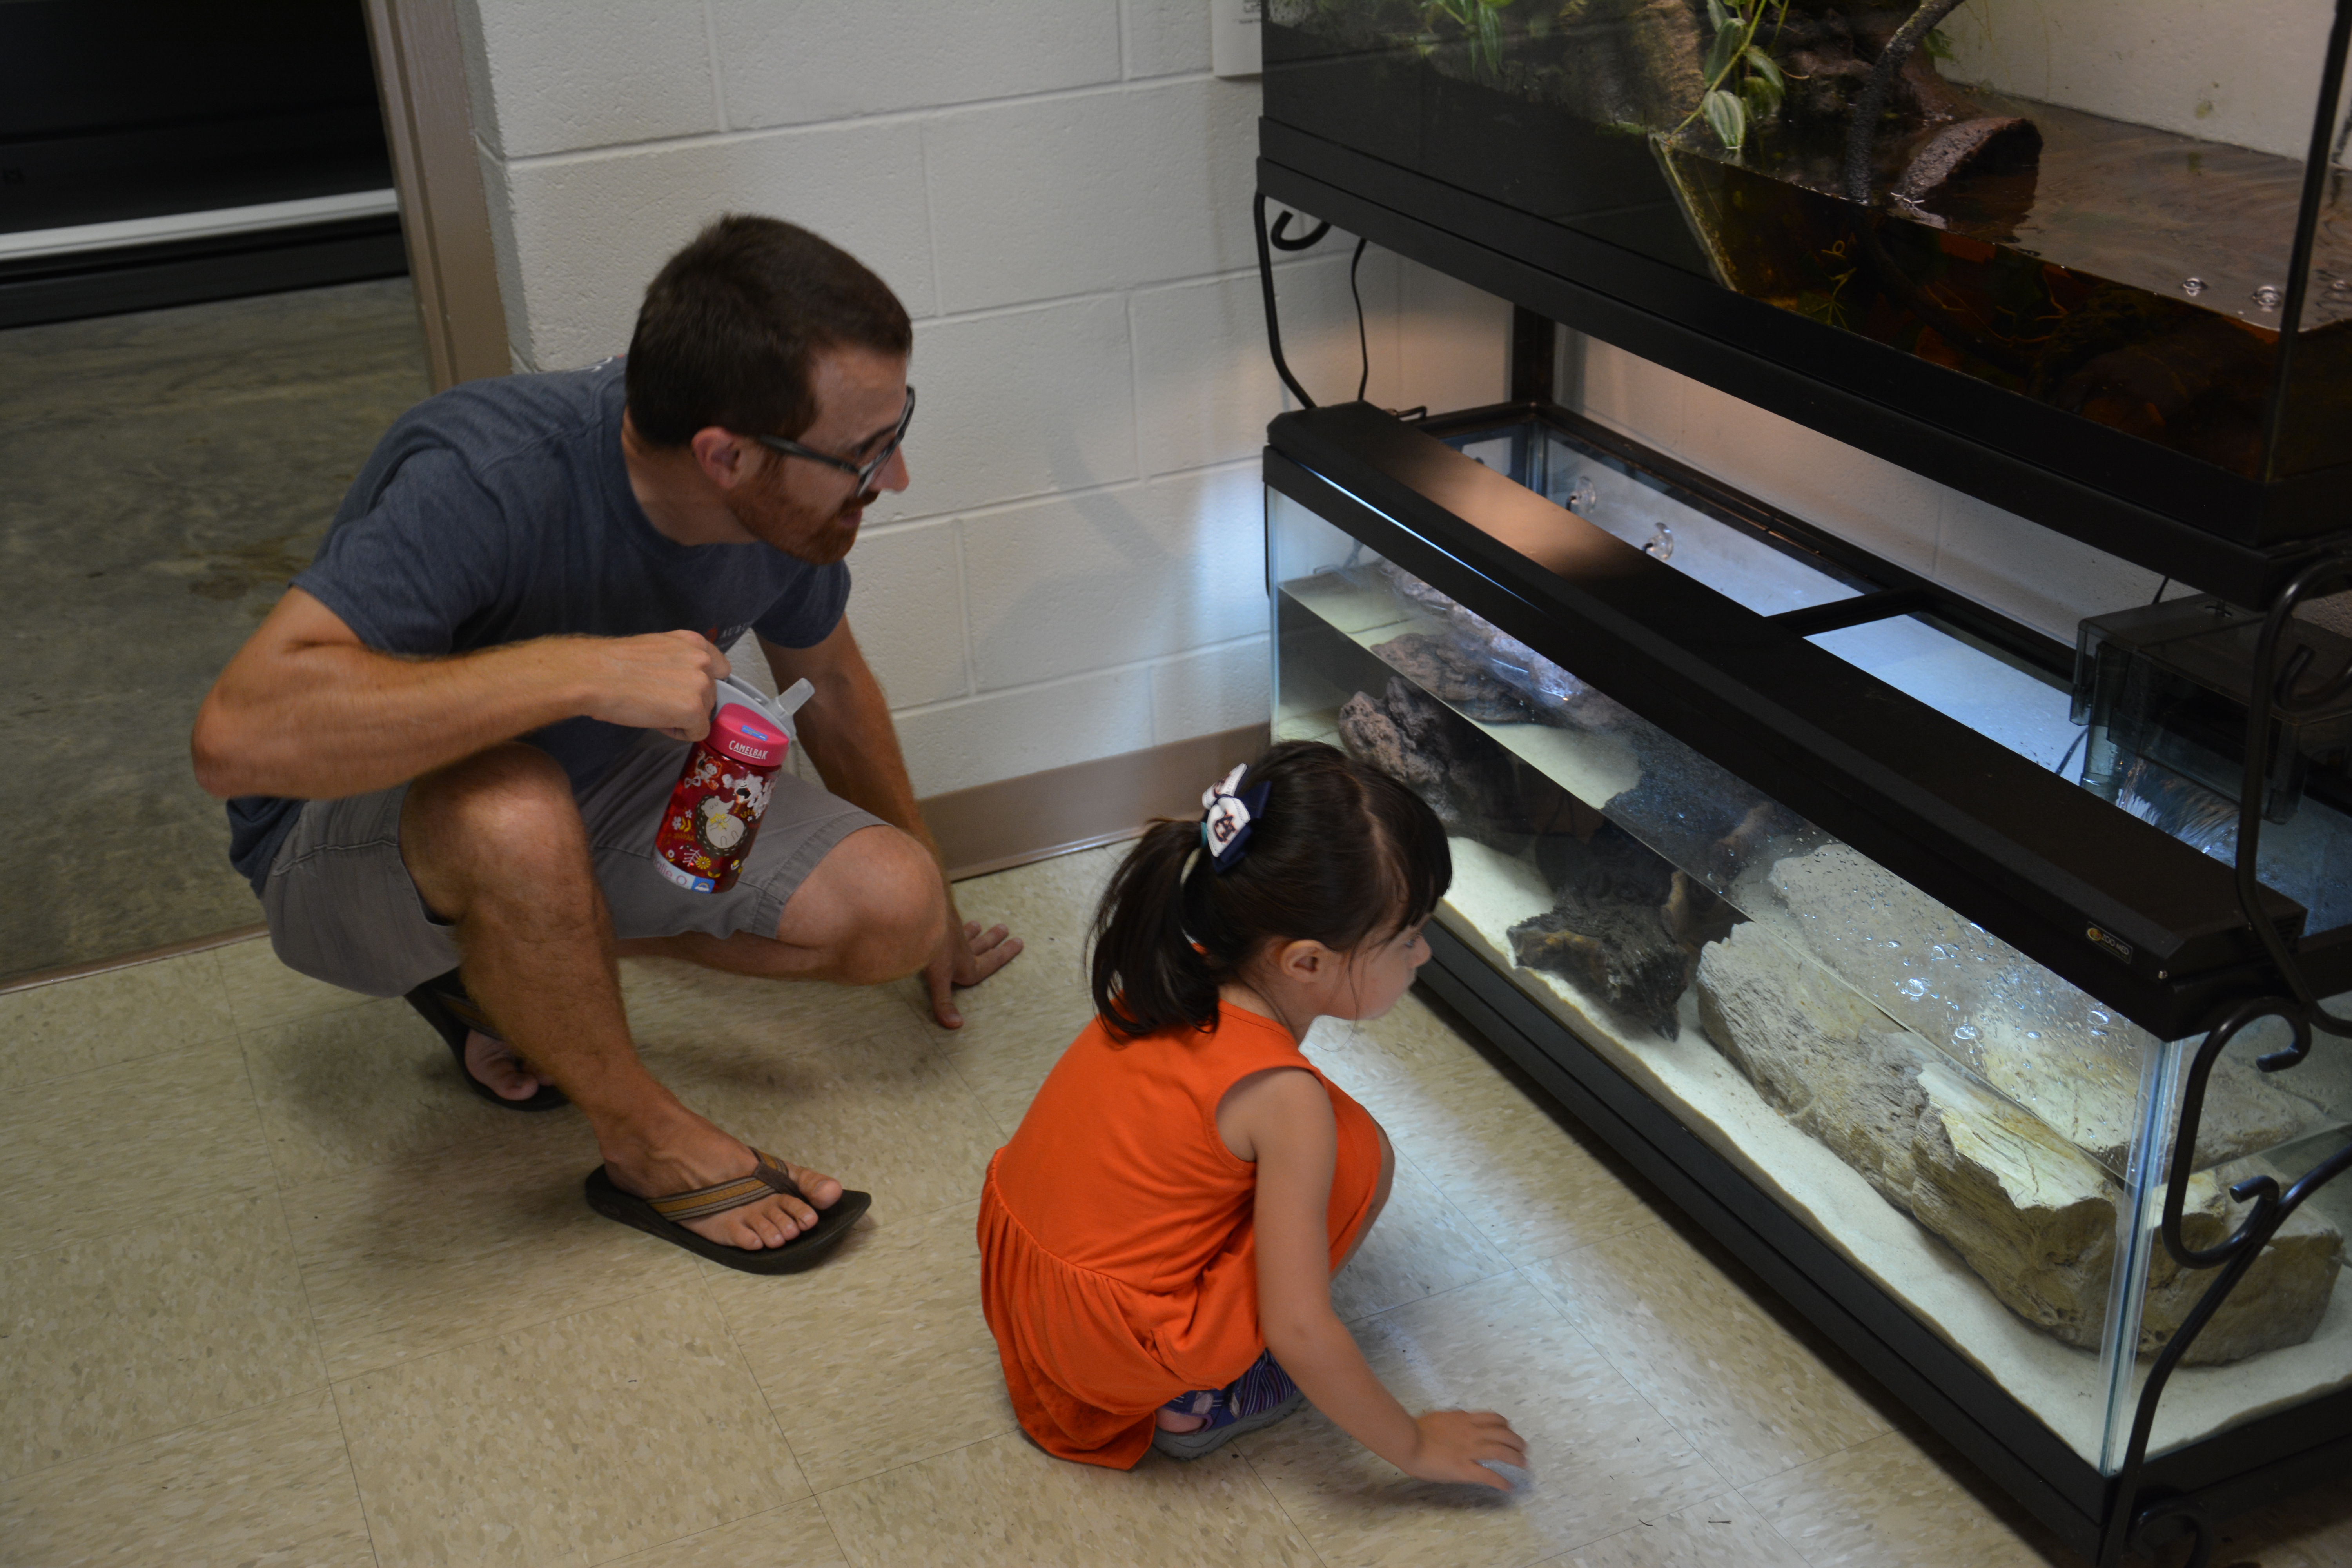 This young visitor enjoyed watching turtles swimming in a tank at the museum.